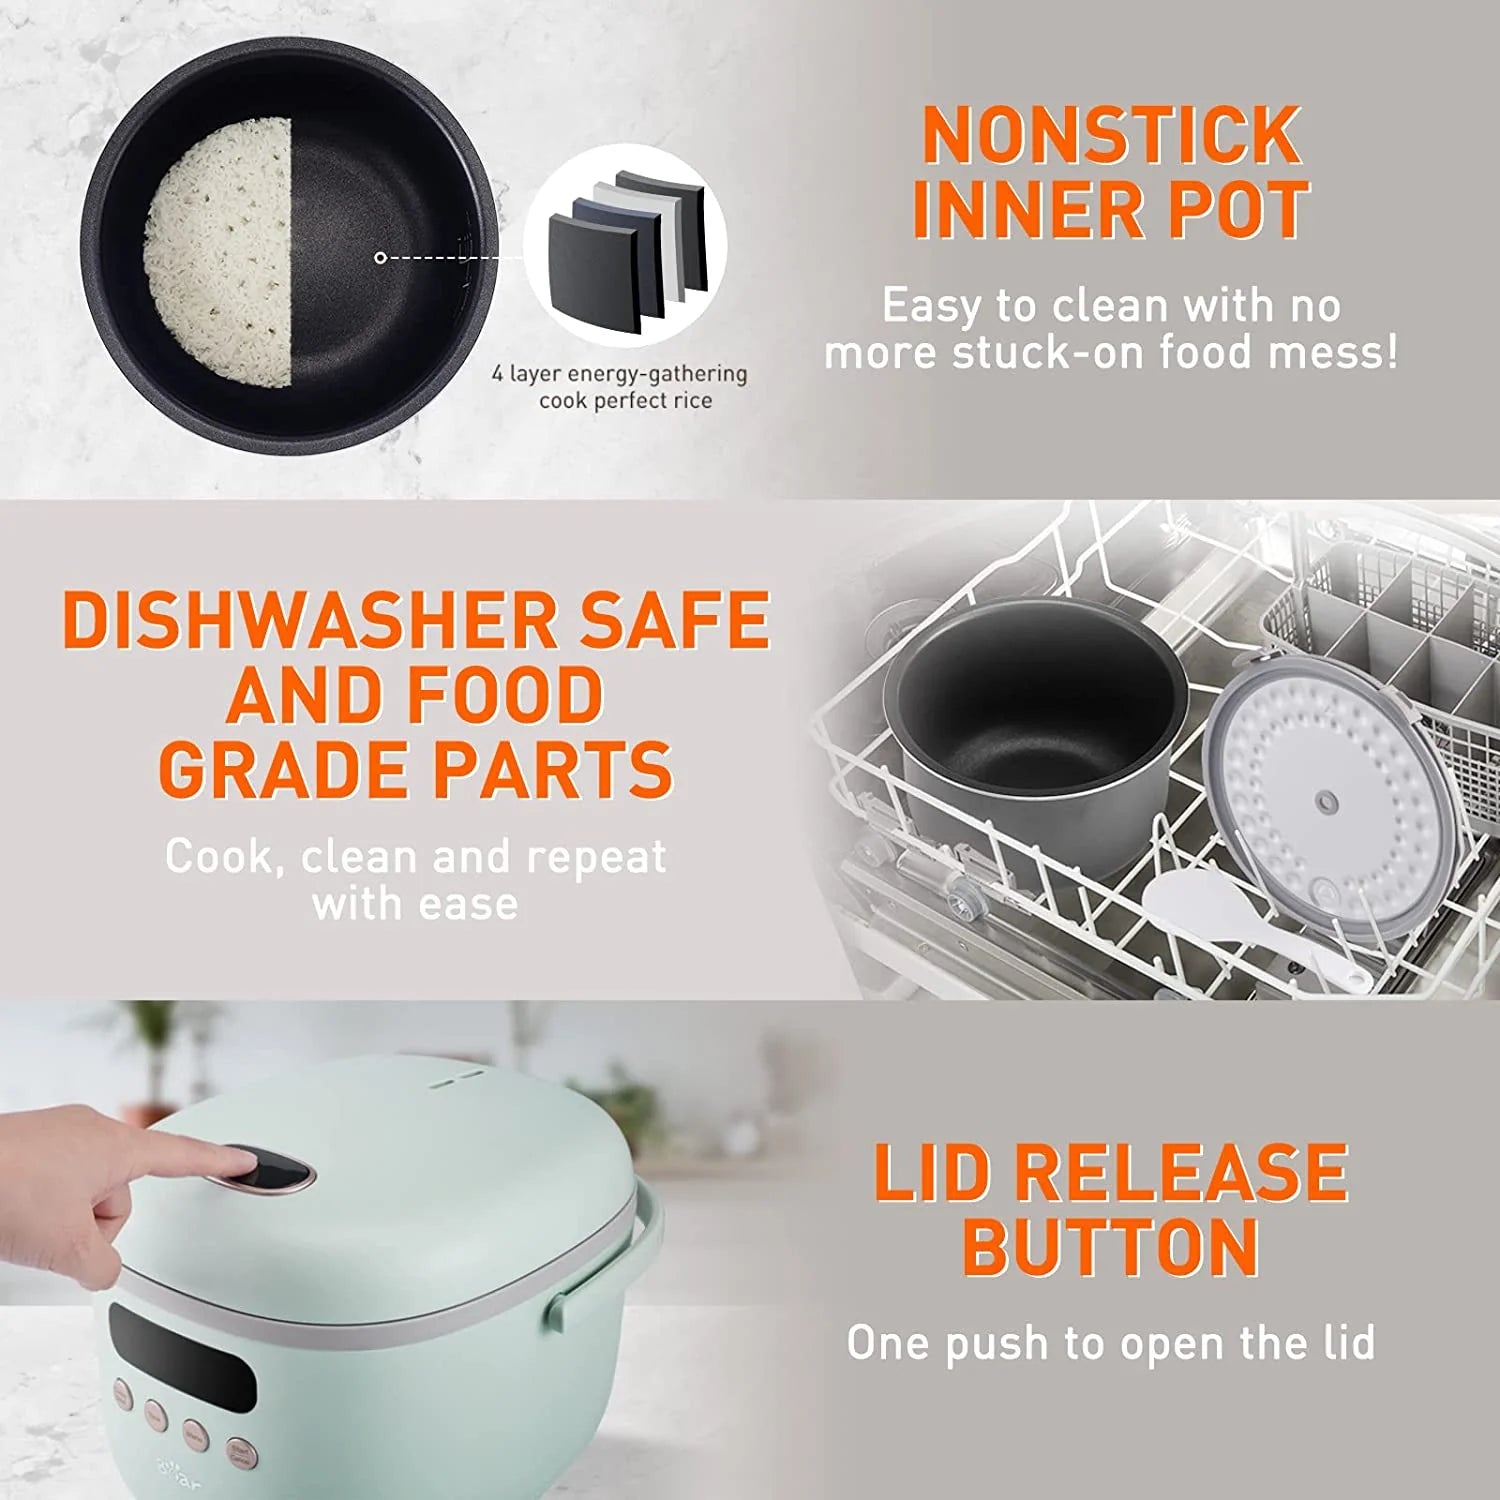 11-Cup Multifunction Indirect Heat Rice Cooker Steamer and Warmer  TAC-11B(UL)